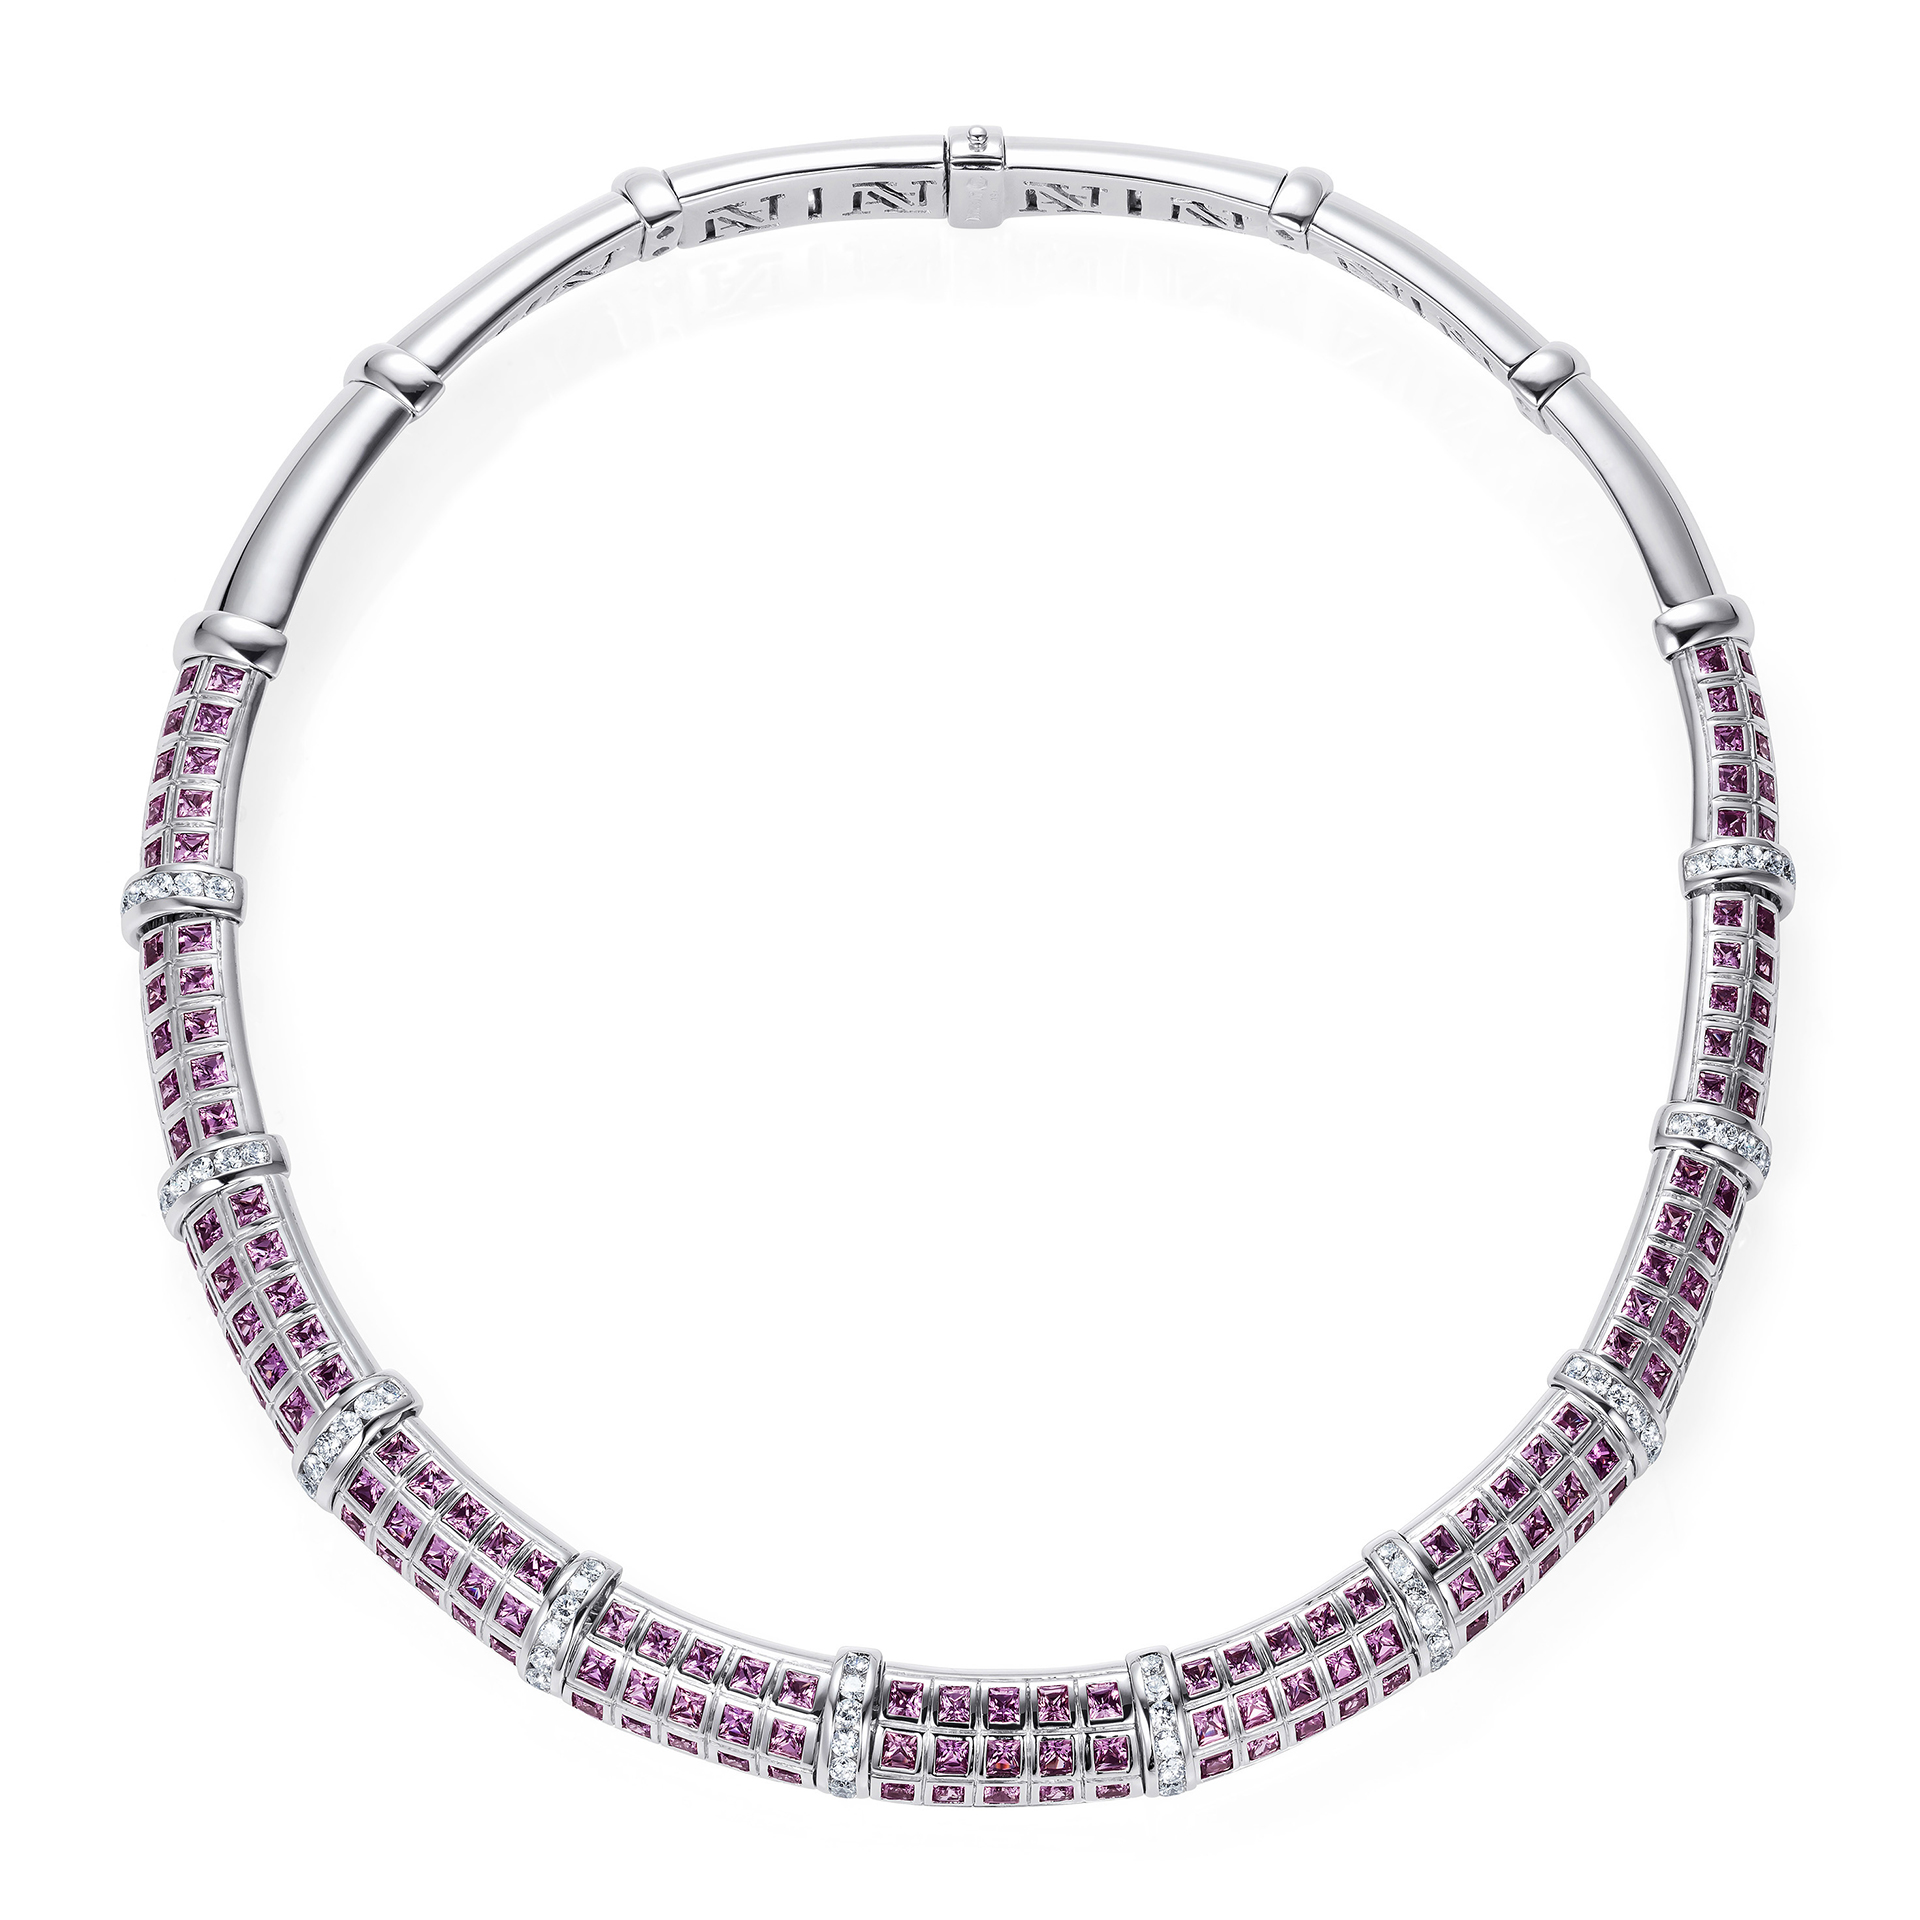 Avakian Pink sapphire earring and necklace set